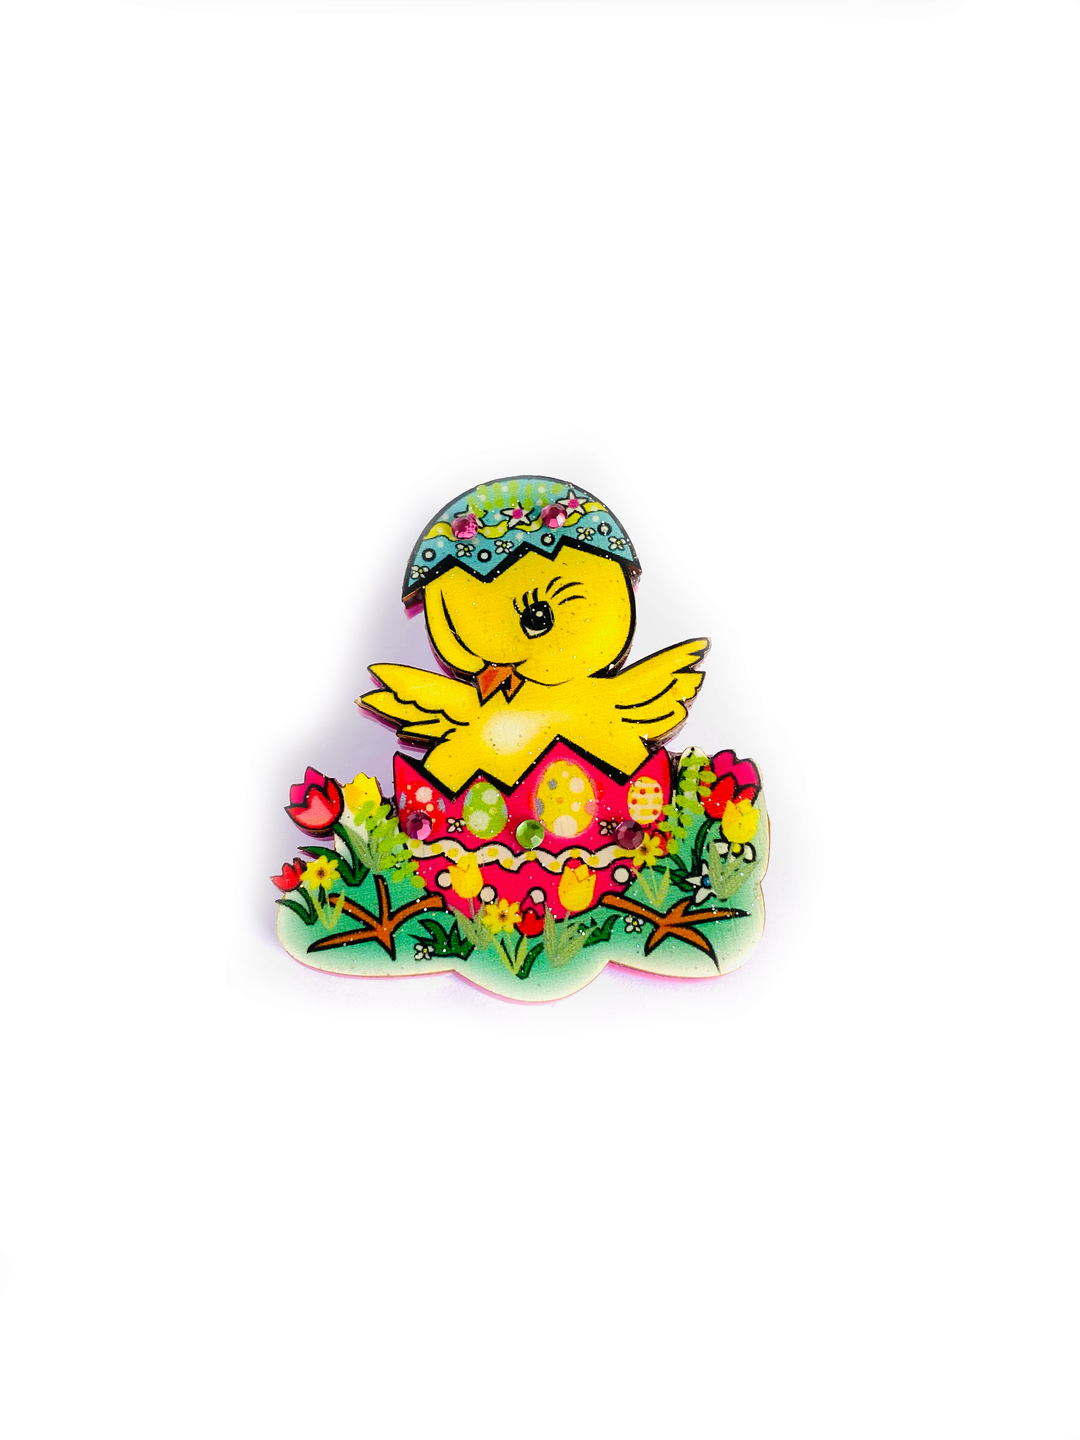 Benny the Easter Chick Brooch by Rosie Rose Parker